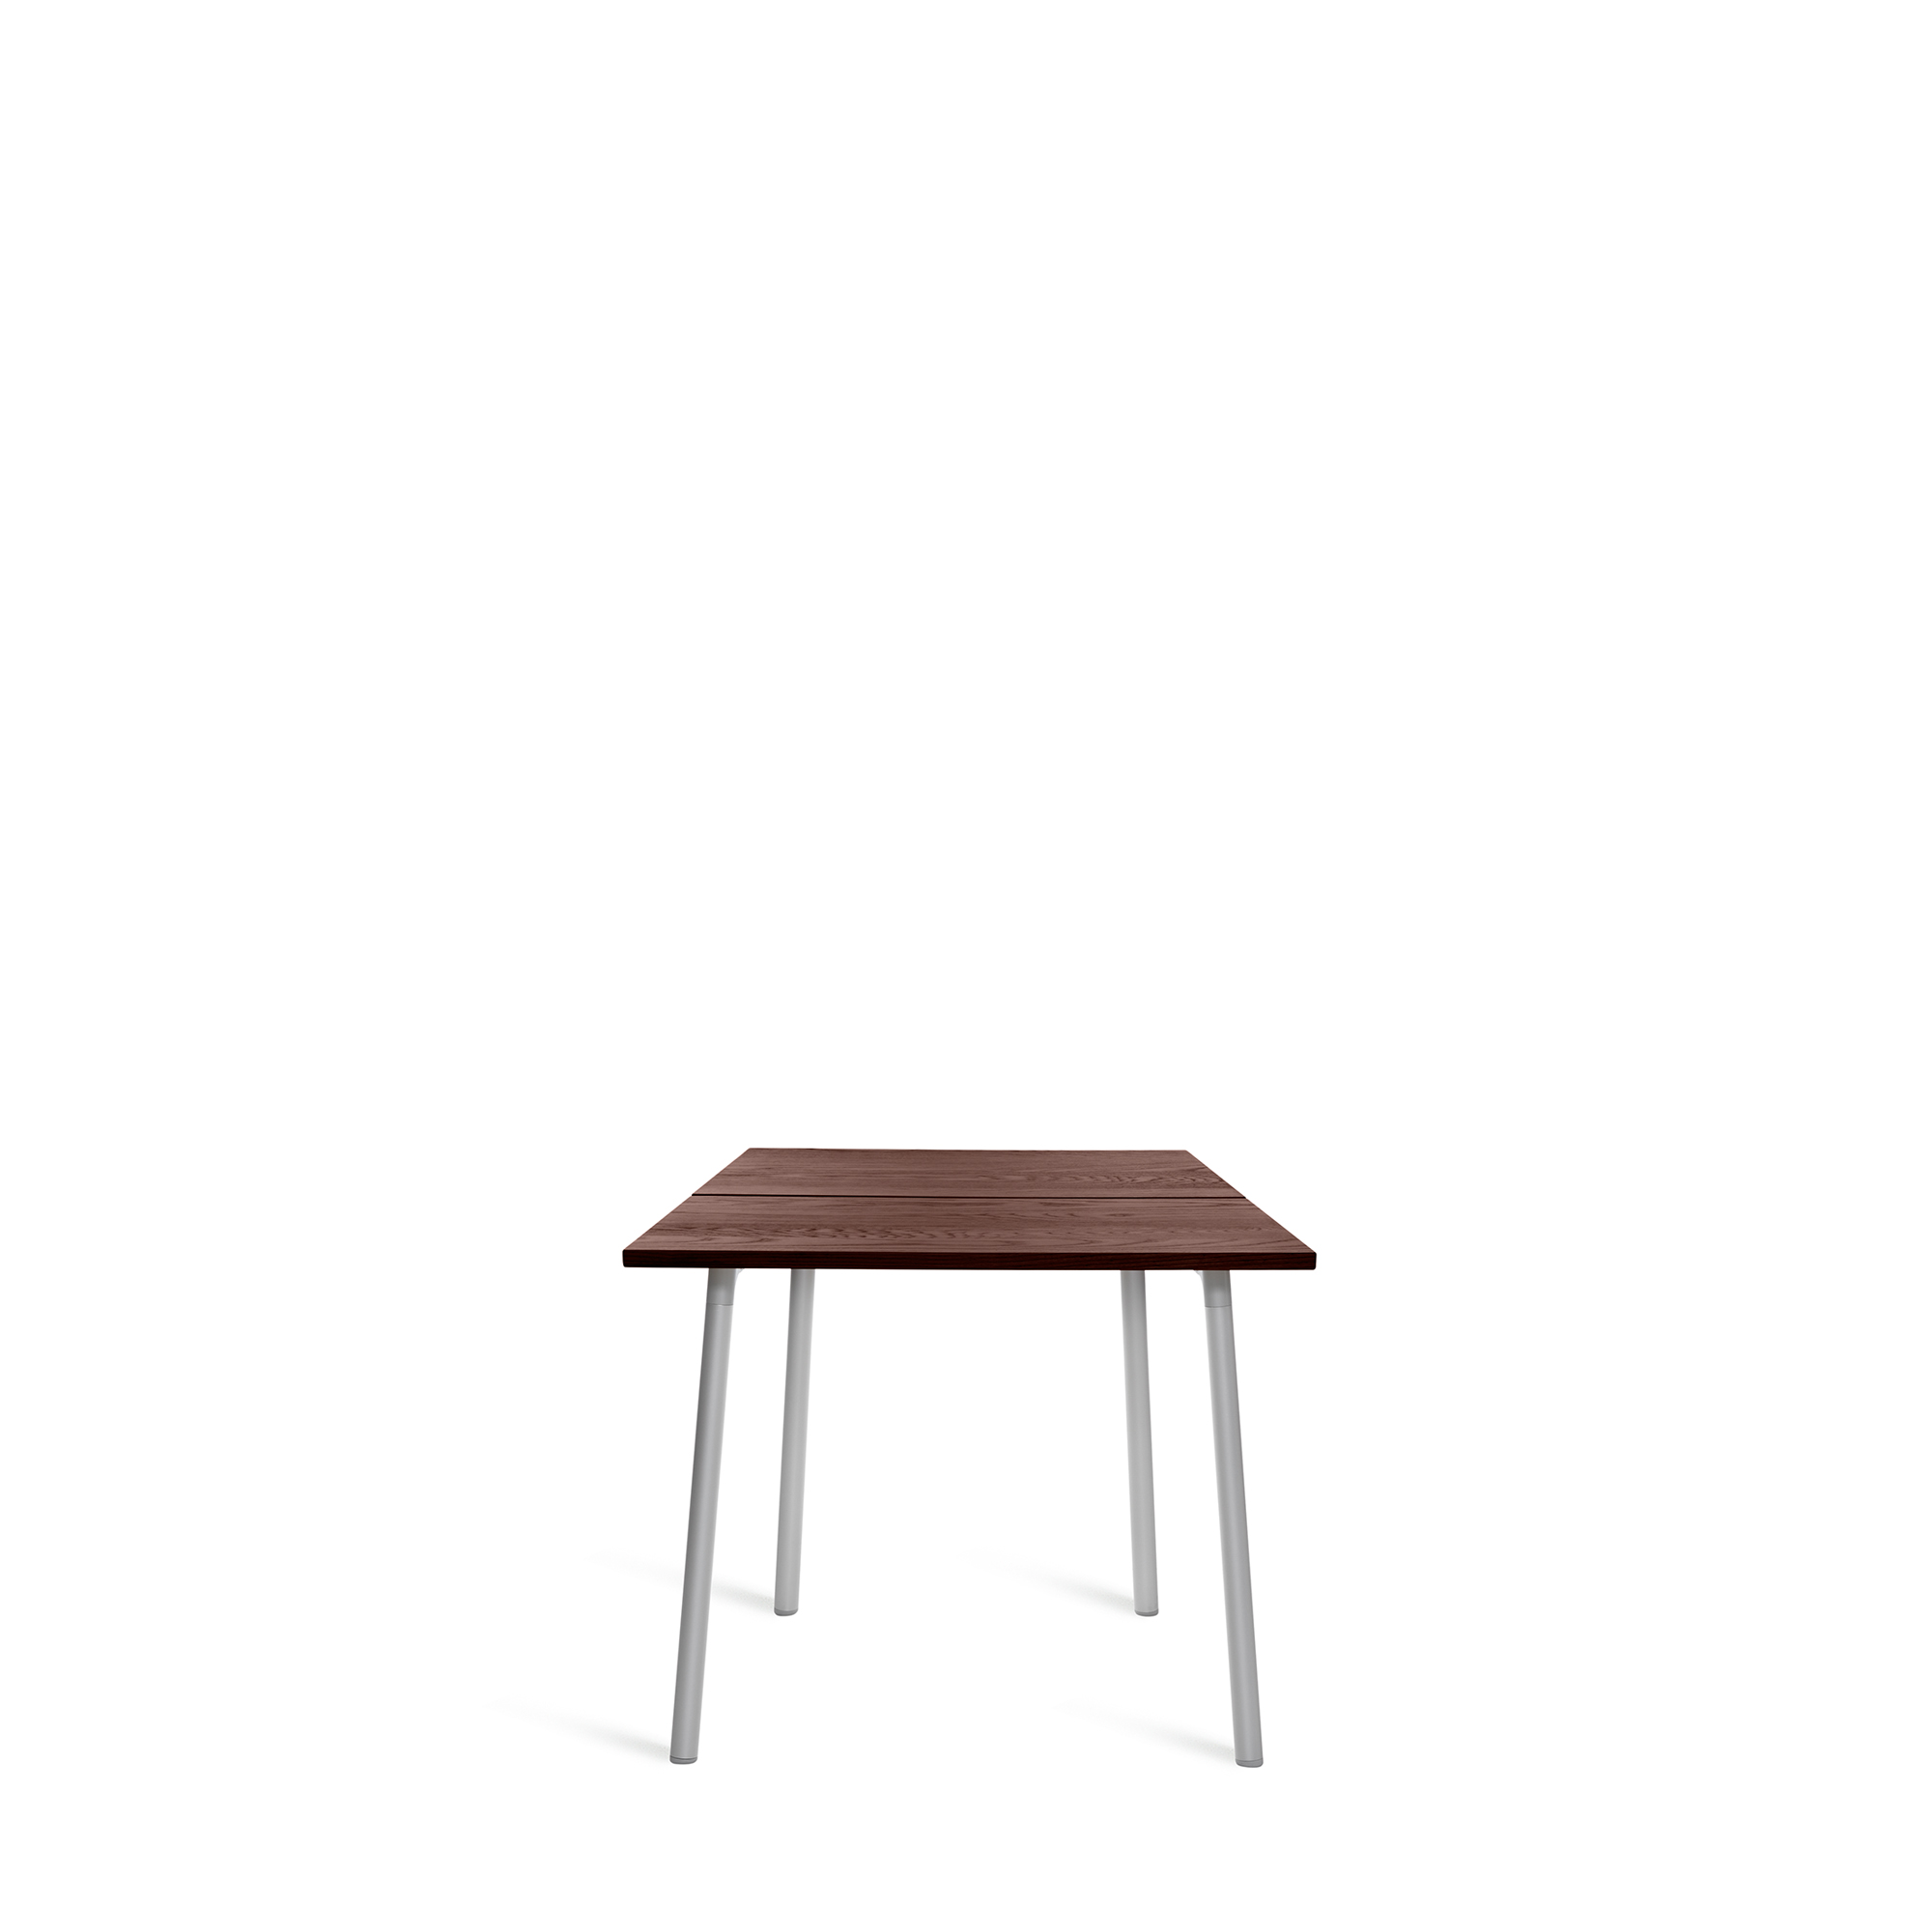 Run Table by Sam Hecht and Kim Colin